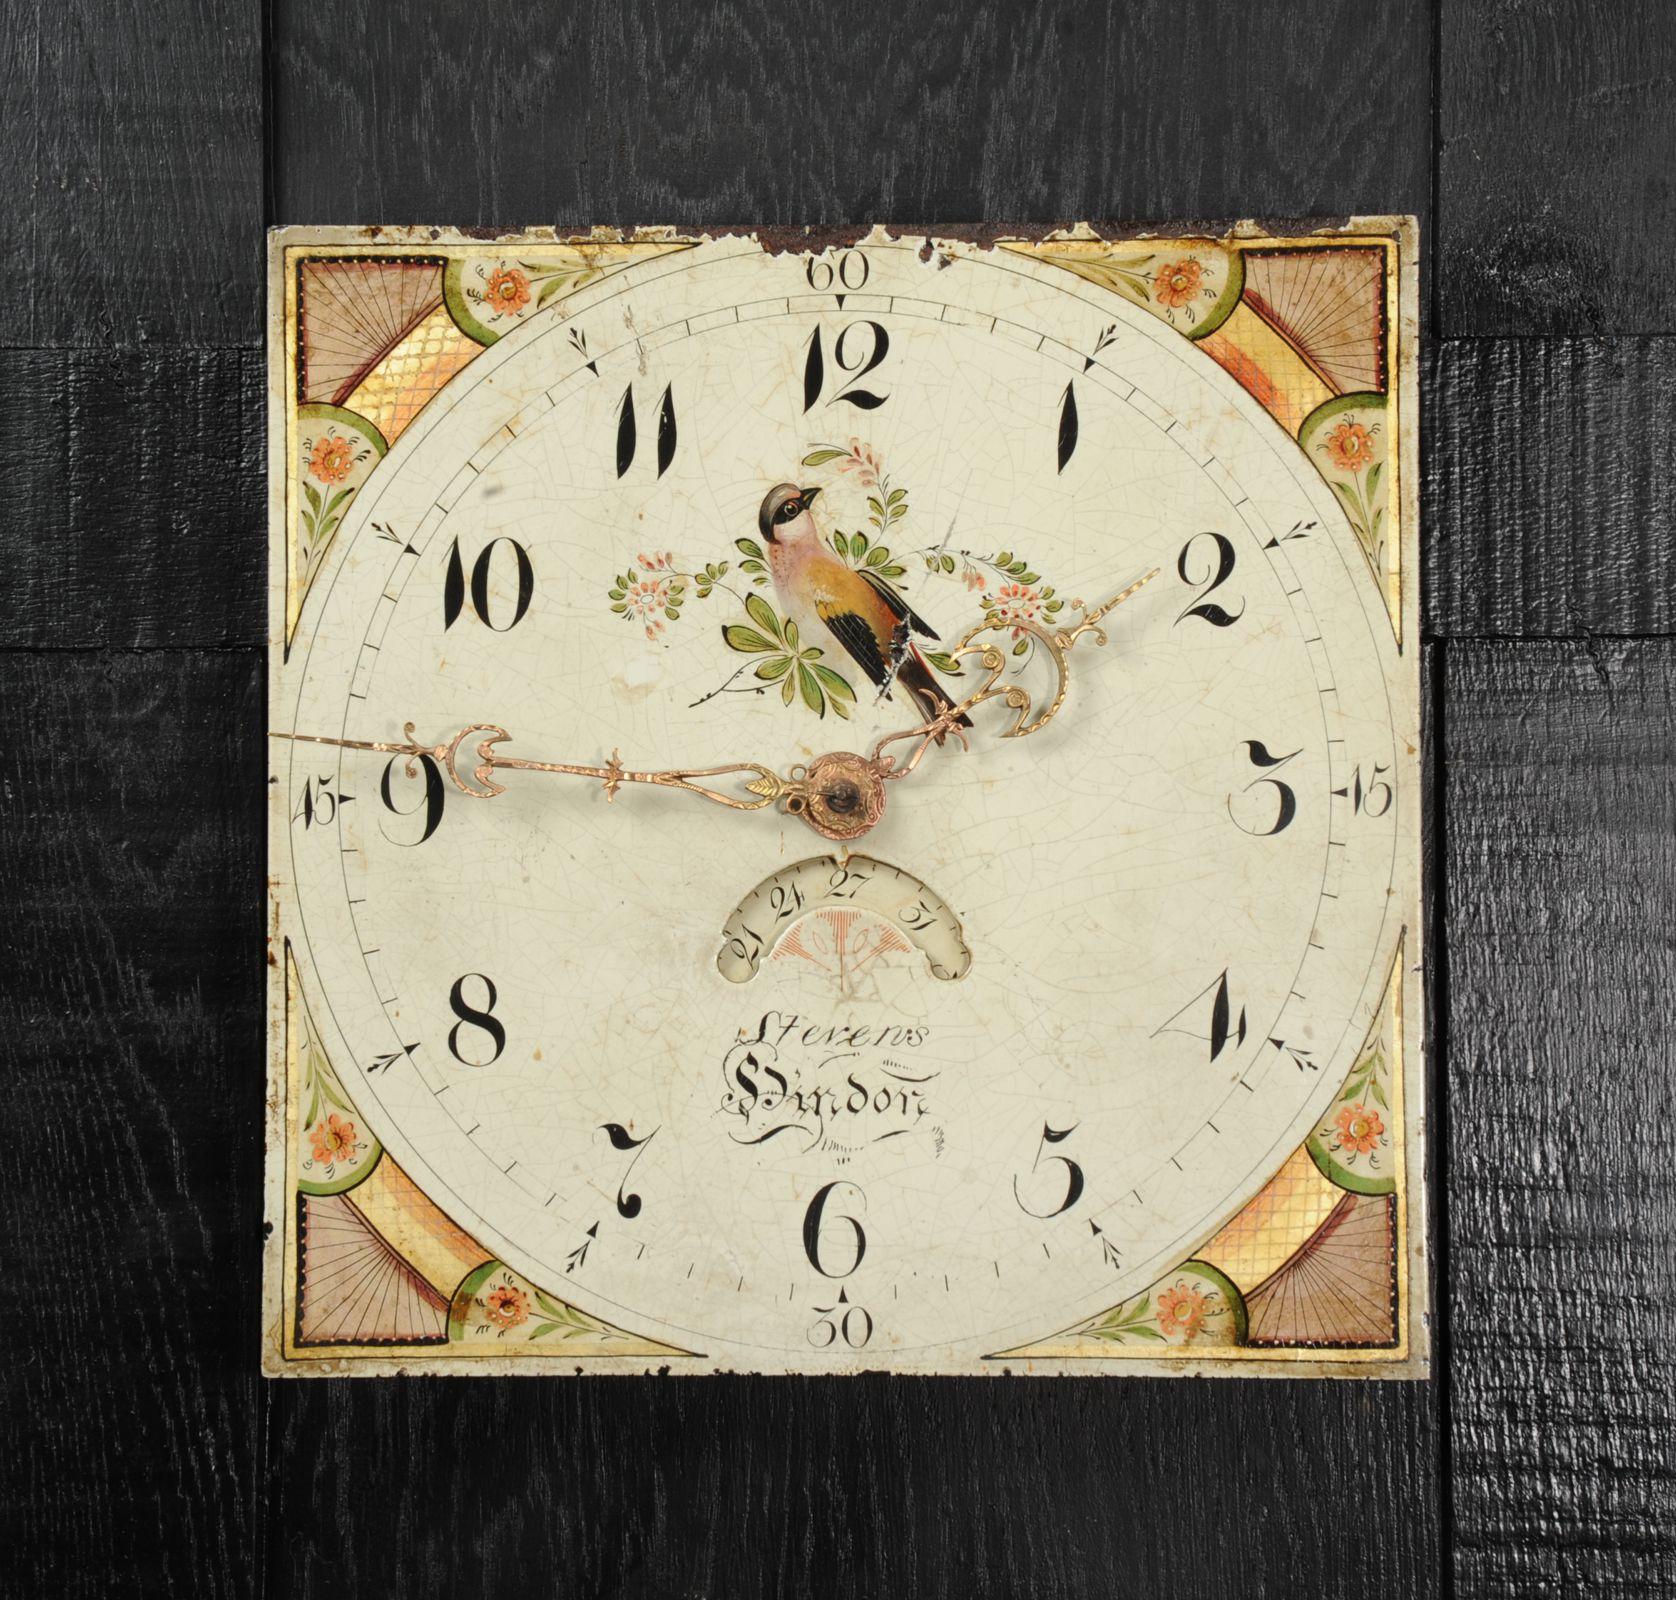 A lovely antique iron clock dial circa 1830 in its original enamel, charmingly decorated with a bird and flowers. With ancient craquelure, marks of a long life and its original handcut brass hands, all as found by our buyer on a local estate. The